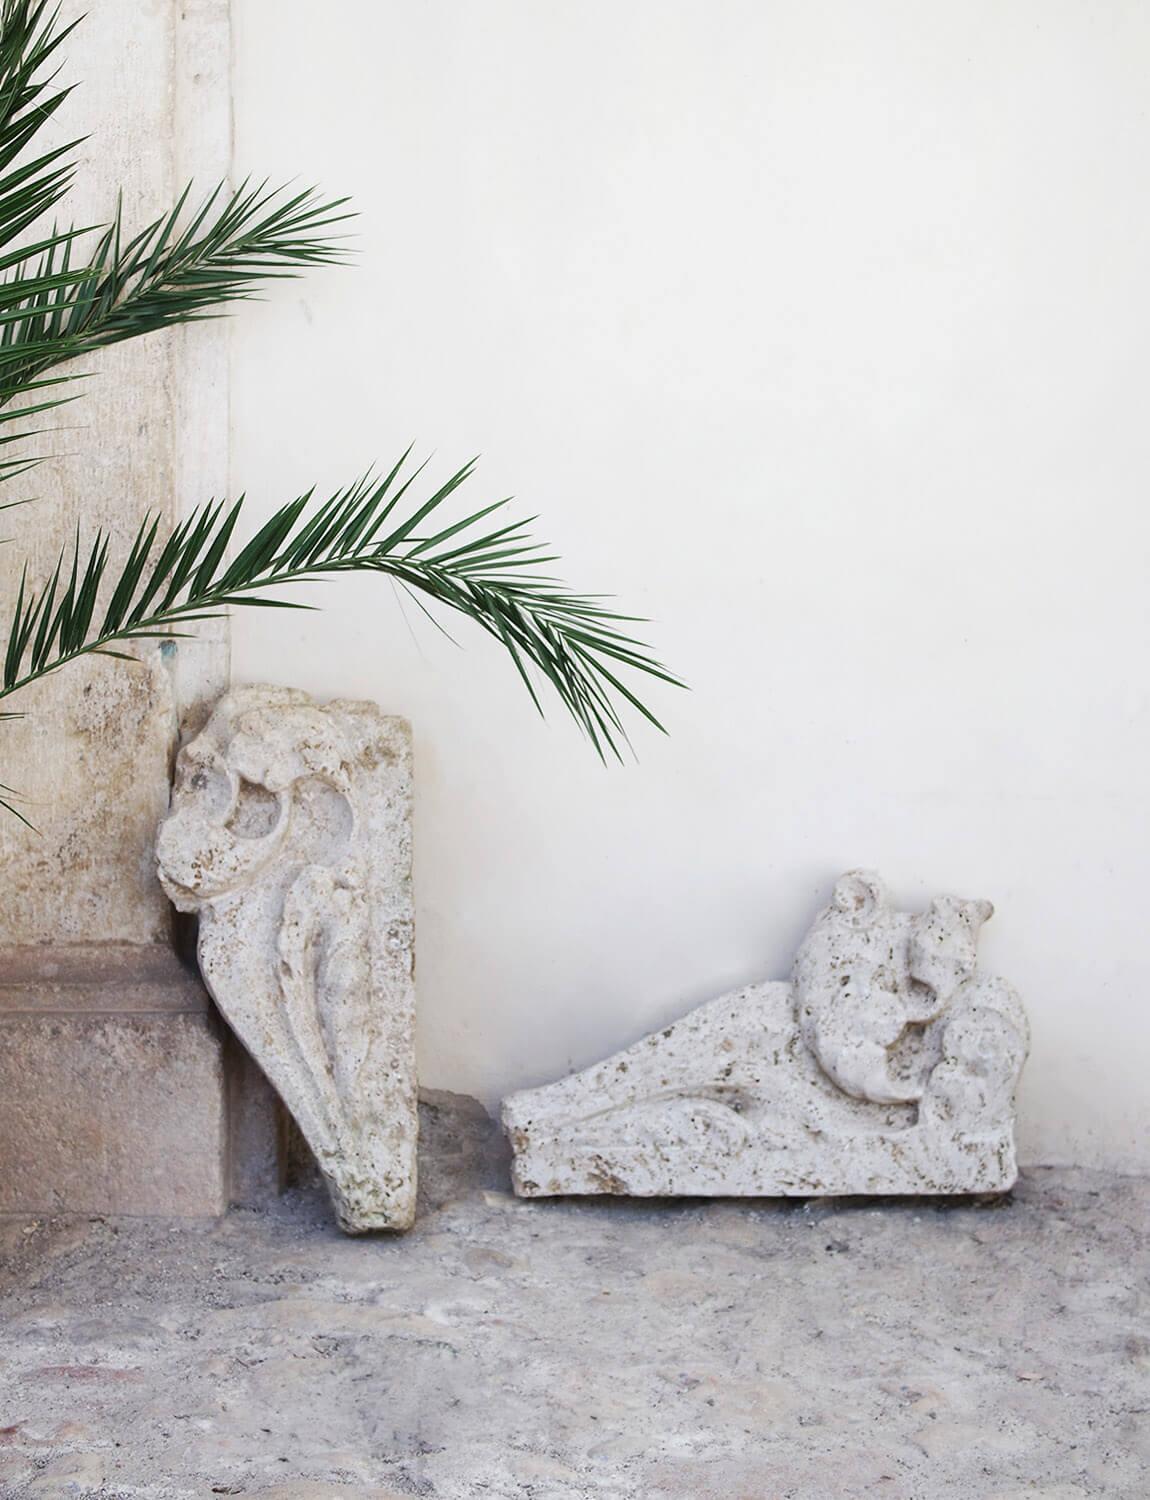 A pair of 300 year old travertine mantles salvaged from a 17th century church in Le Marche. The stone is absolutely beautiful and the pieces have aged allowing for us still to see the intricate carvings that once were. These mantles were likely used